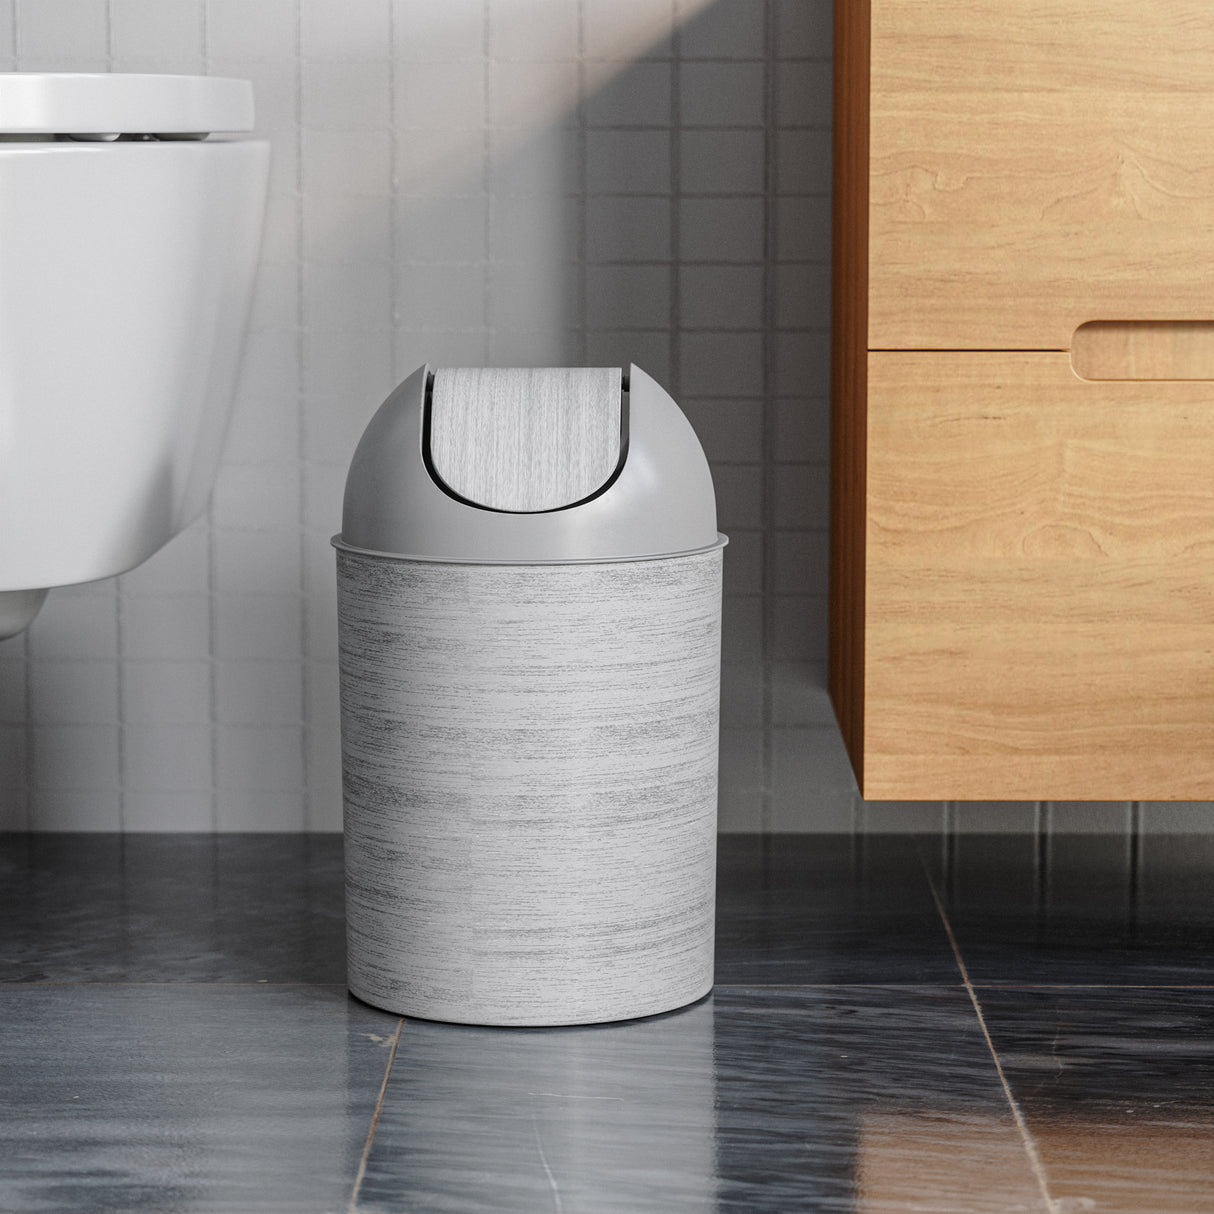 Stylish Small Bathroom Trash Cans for $15 or Less